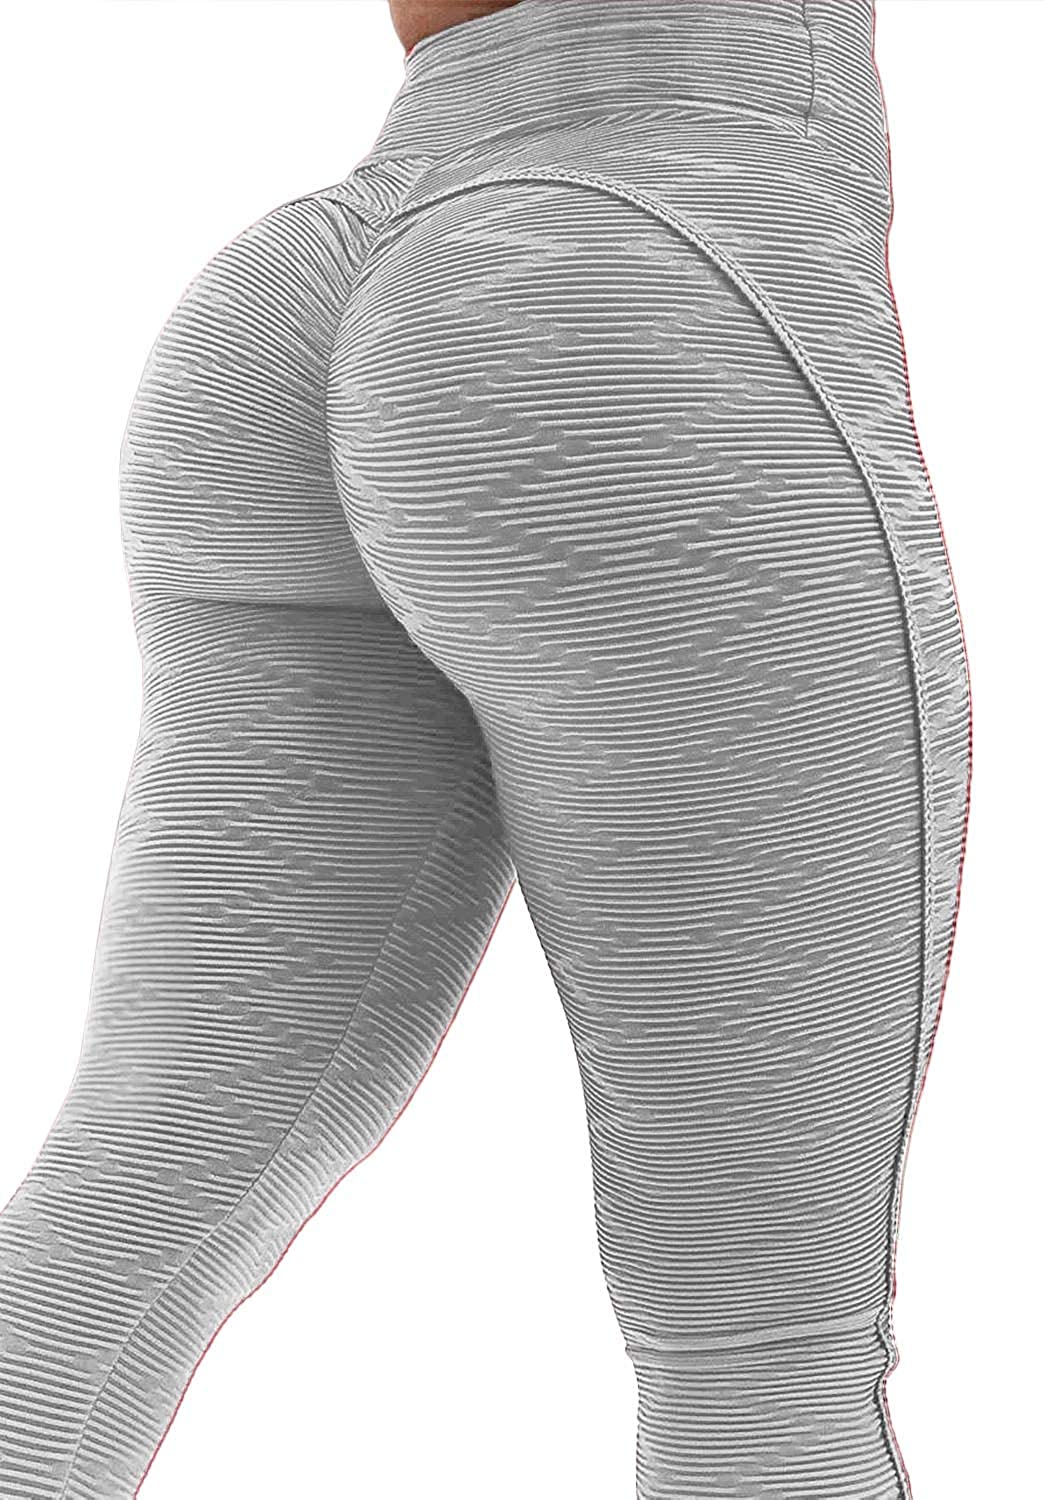 Fittoo Women S High Waist Yoga Pants Tummy Control Scrunched Booty